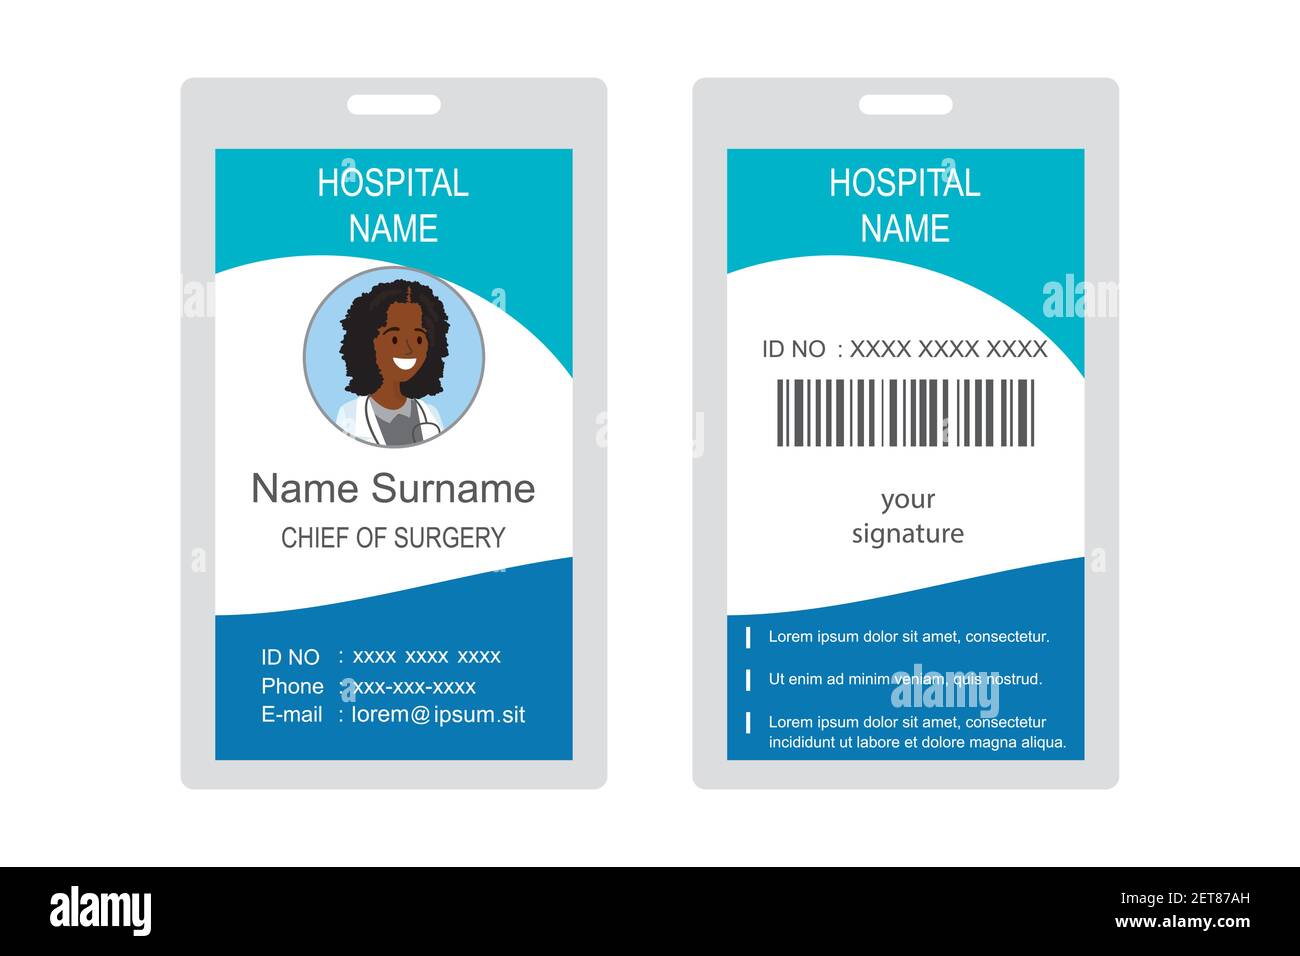 Mali id card front and back